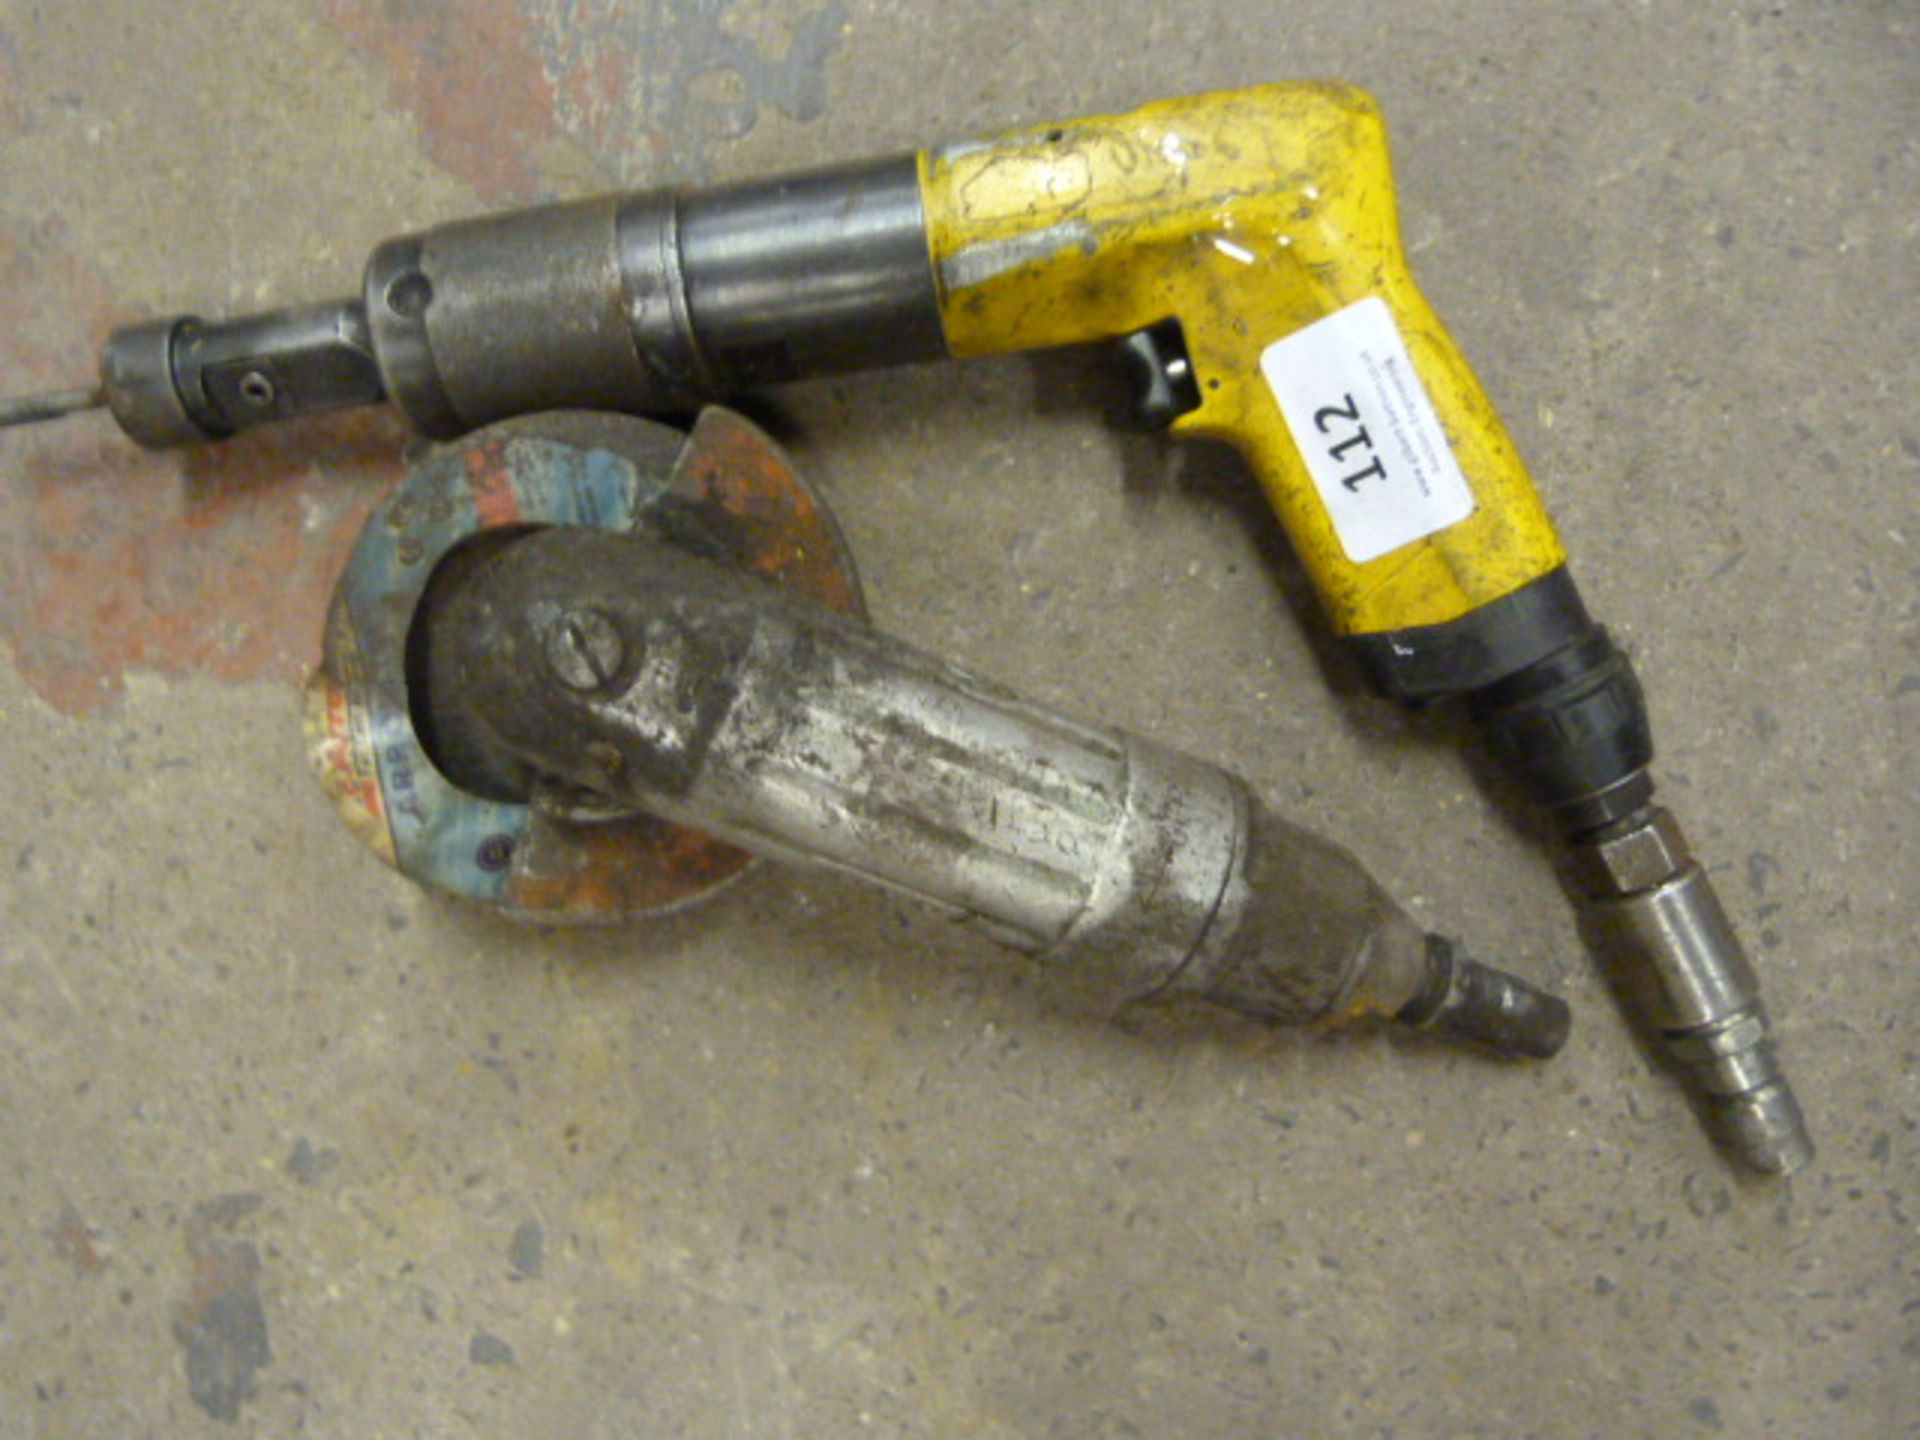 *Pneumatic Grinder and Drill